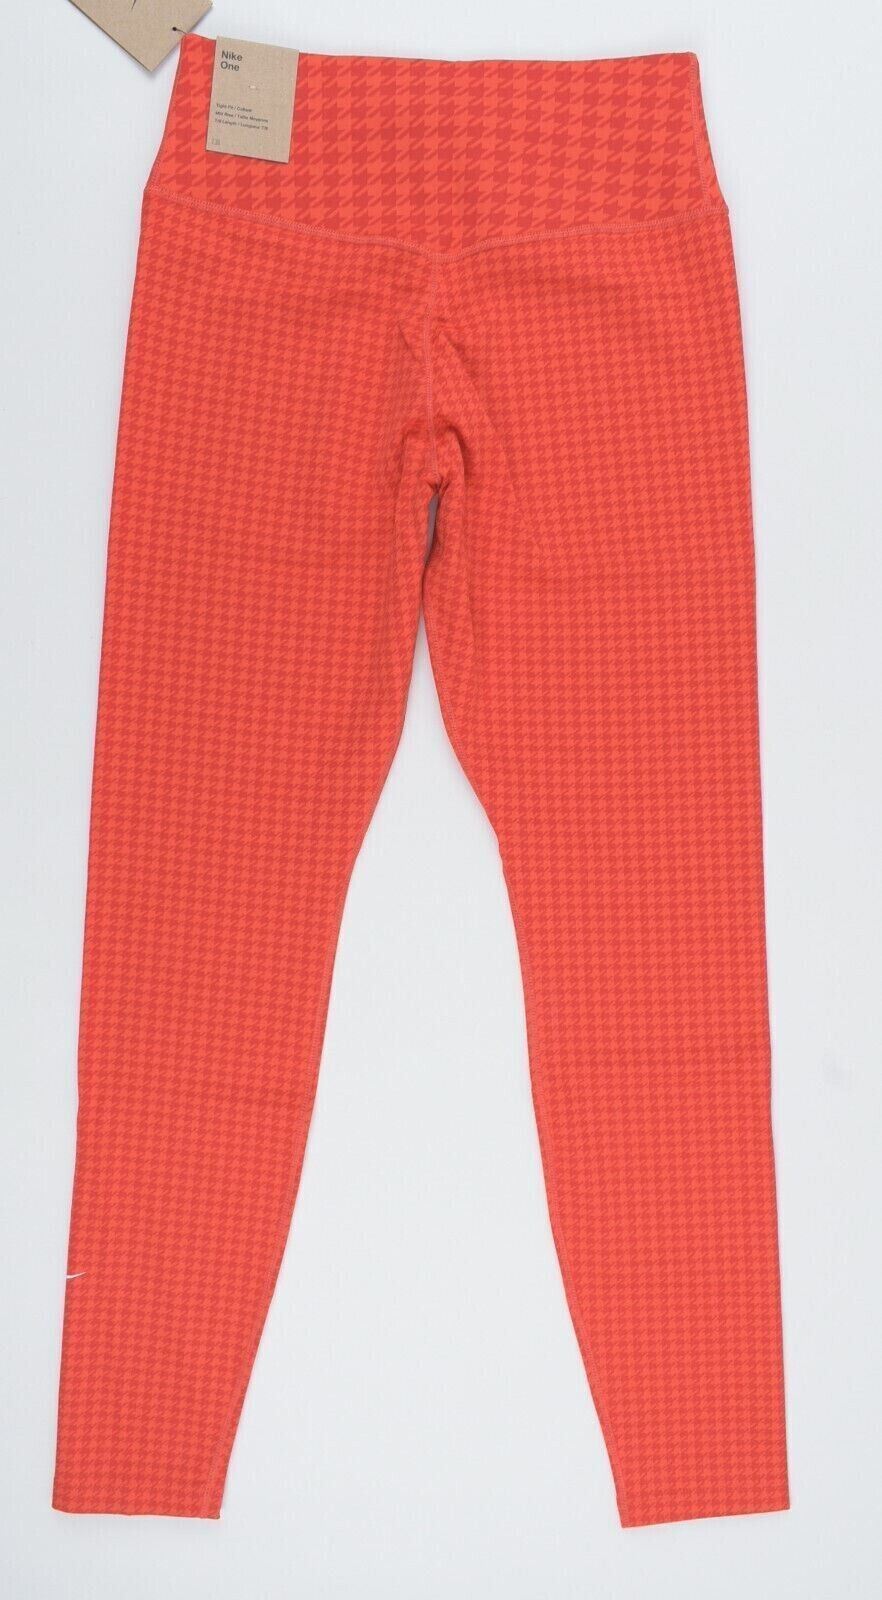 NIKE ONE DRI-FIT Women's Mid-Rise Leggings, Red/Houndstooth Print, size XS /UK 8